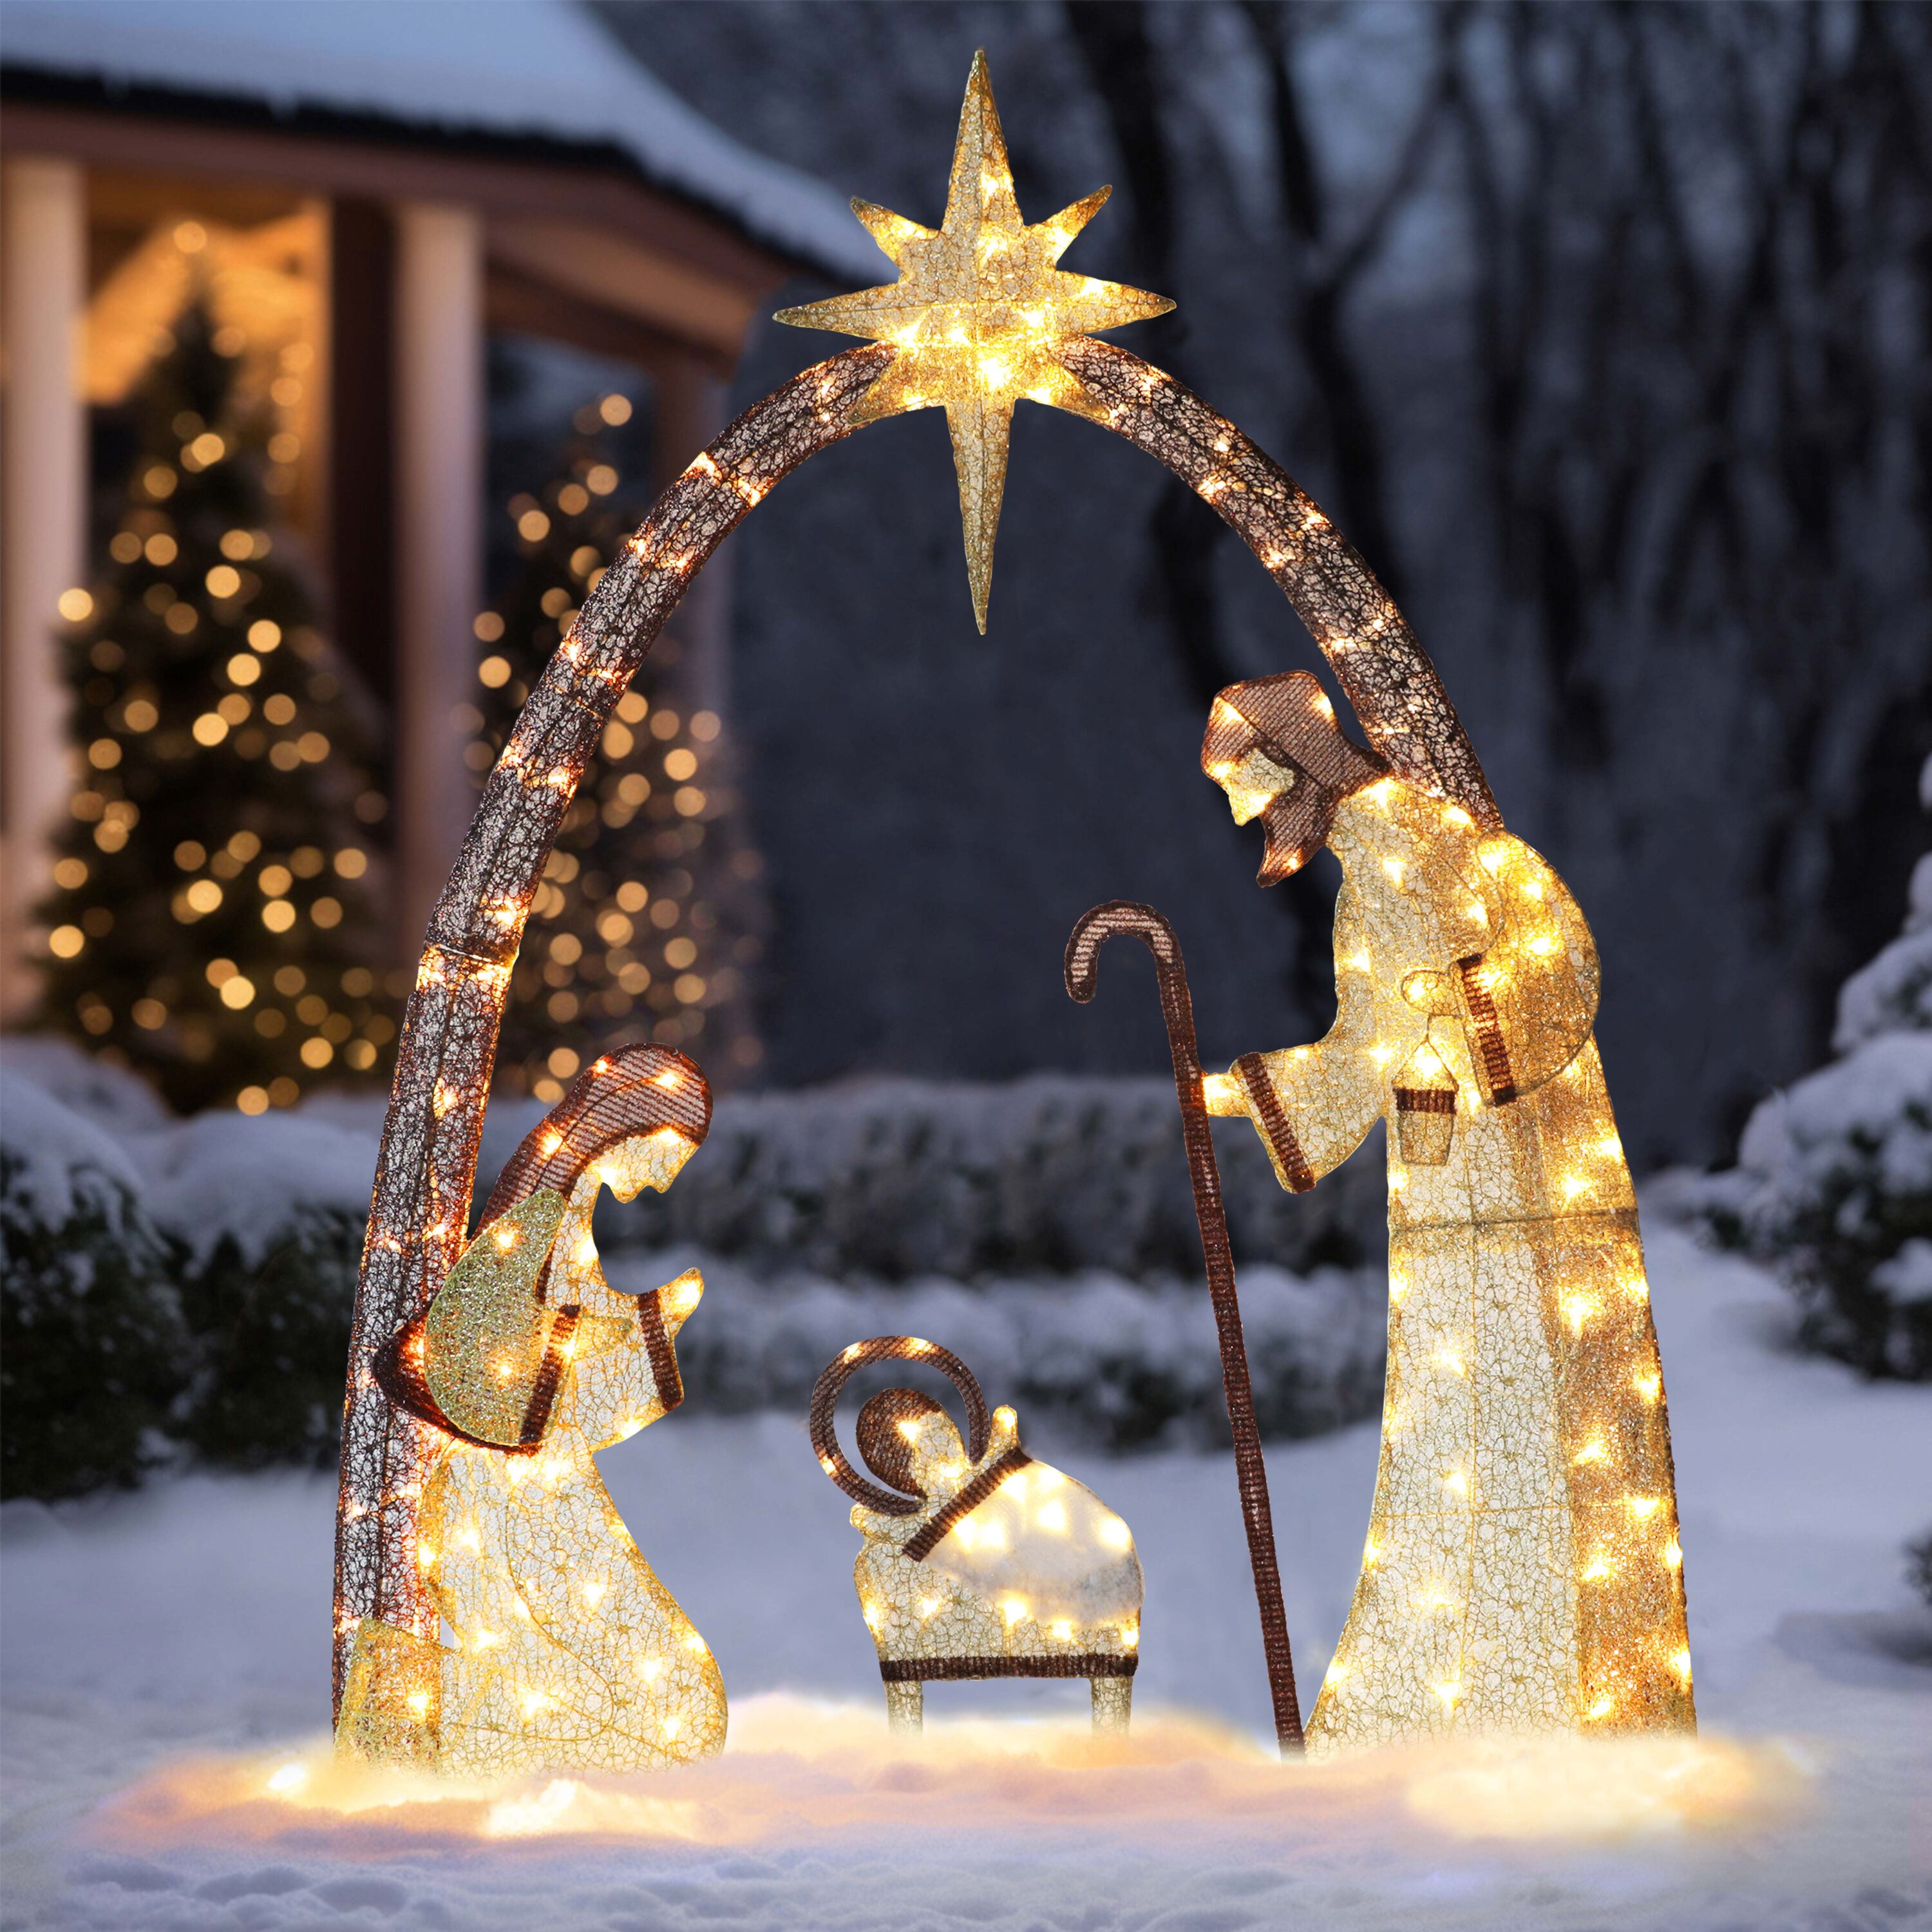 Nativity Lighted Outdoor Christmas Decorations at Lowes.com